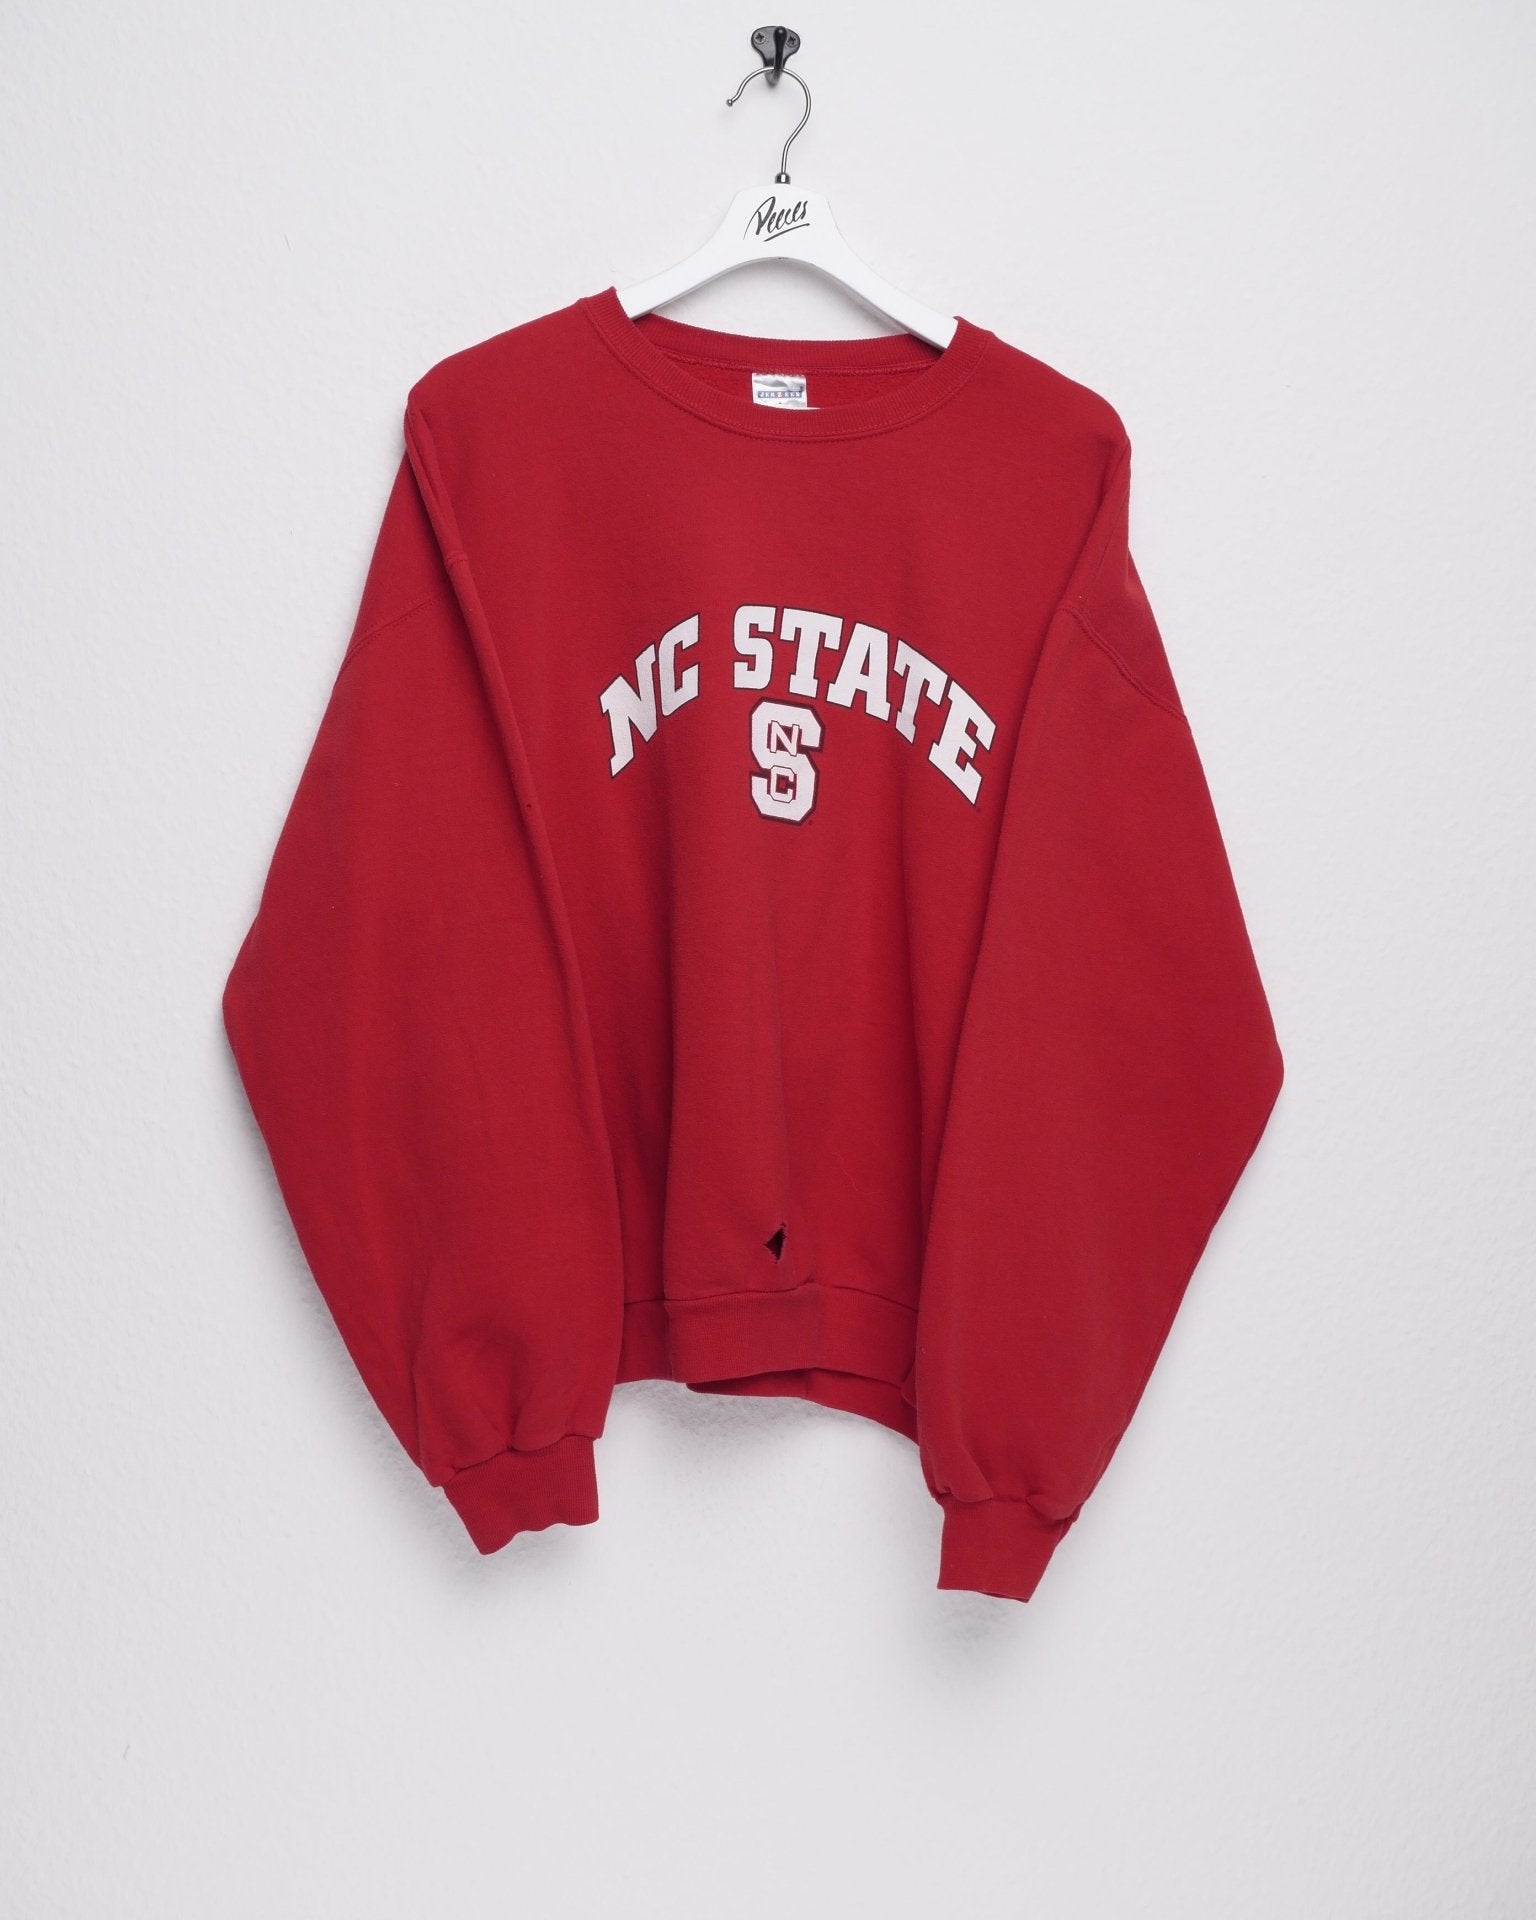 NC State University printed Logo red Sweater - Peeces